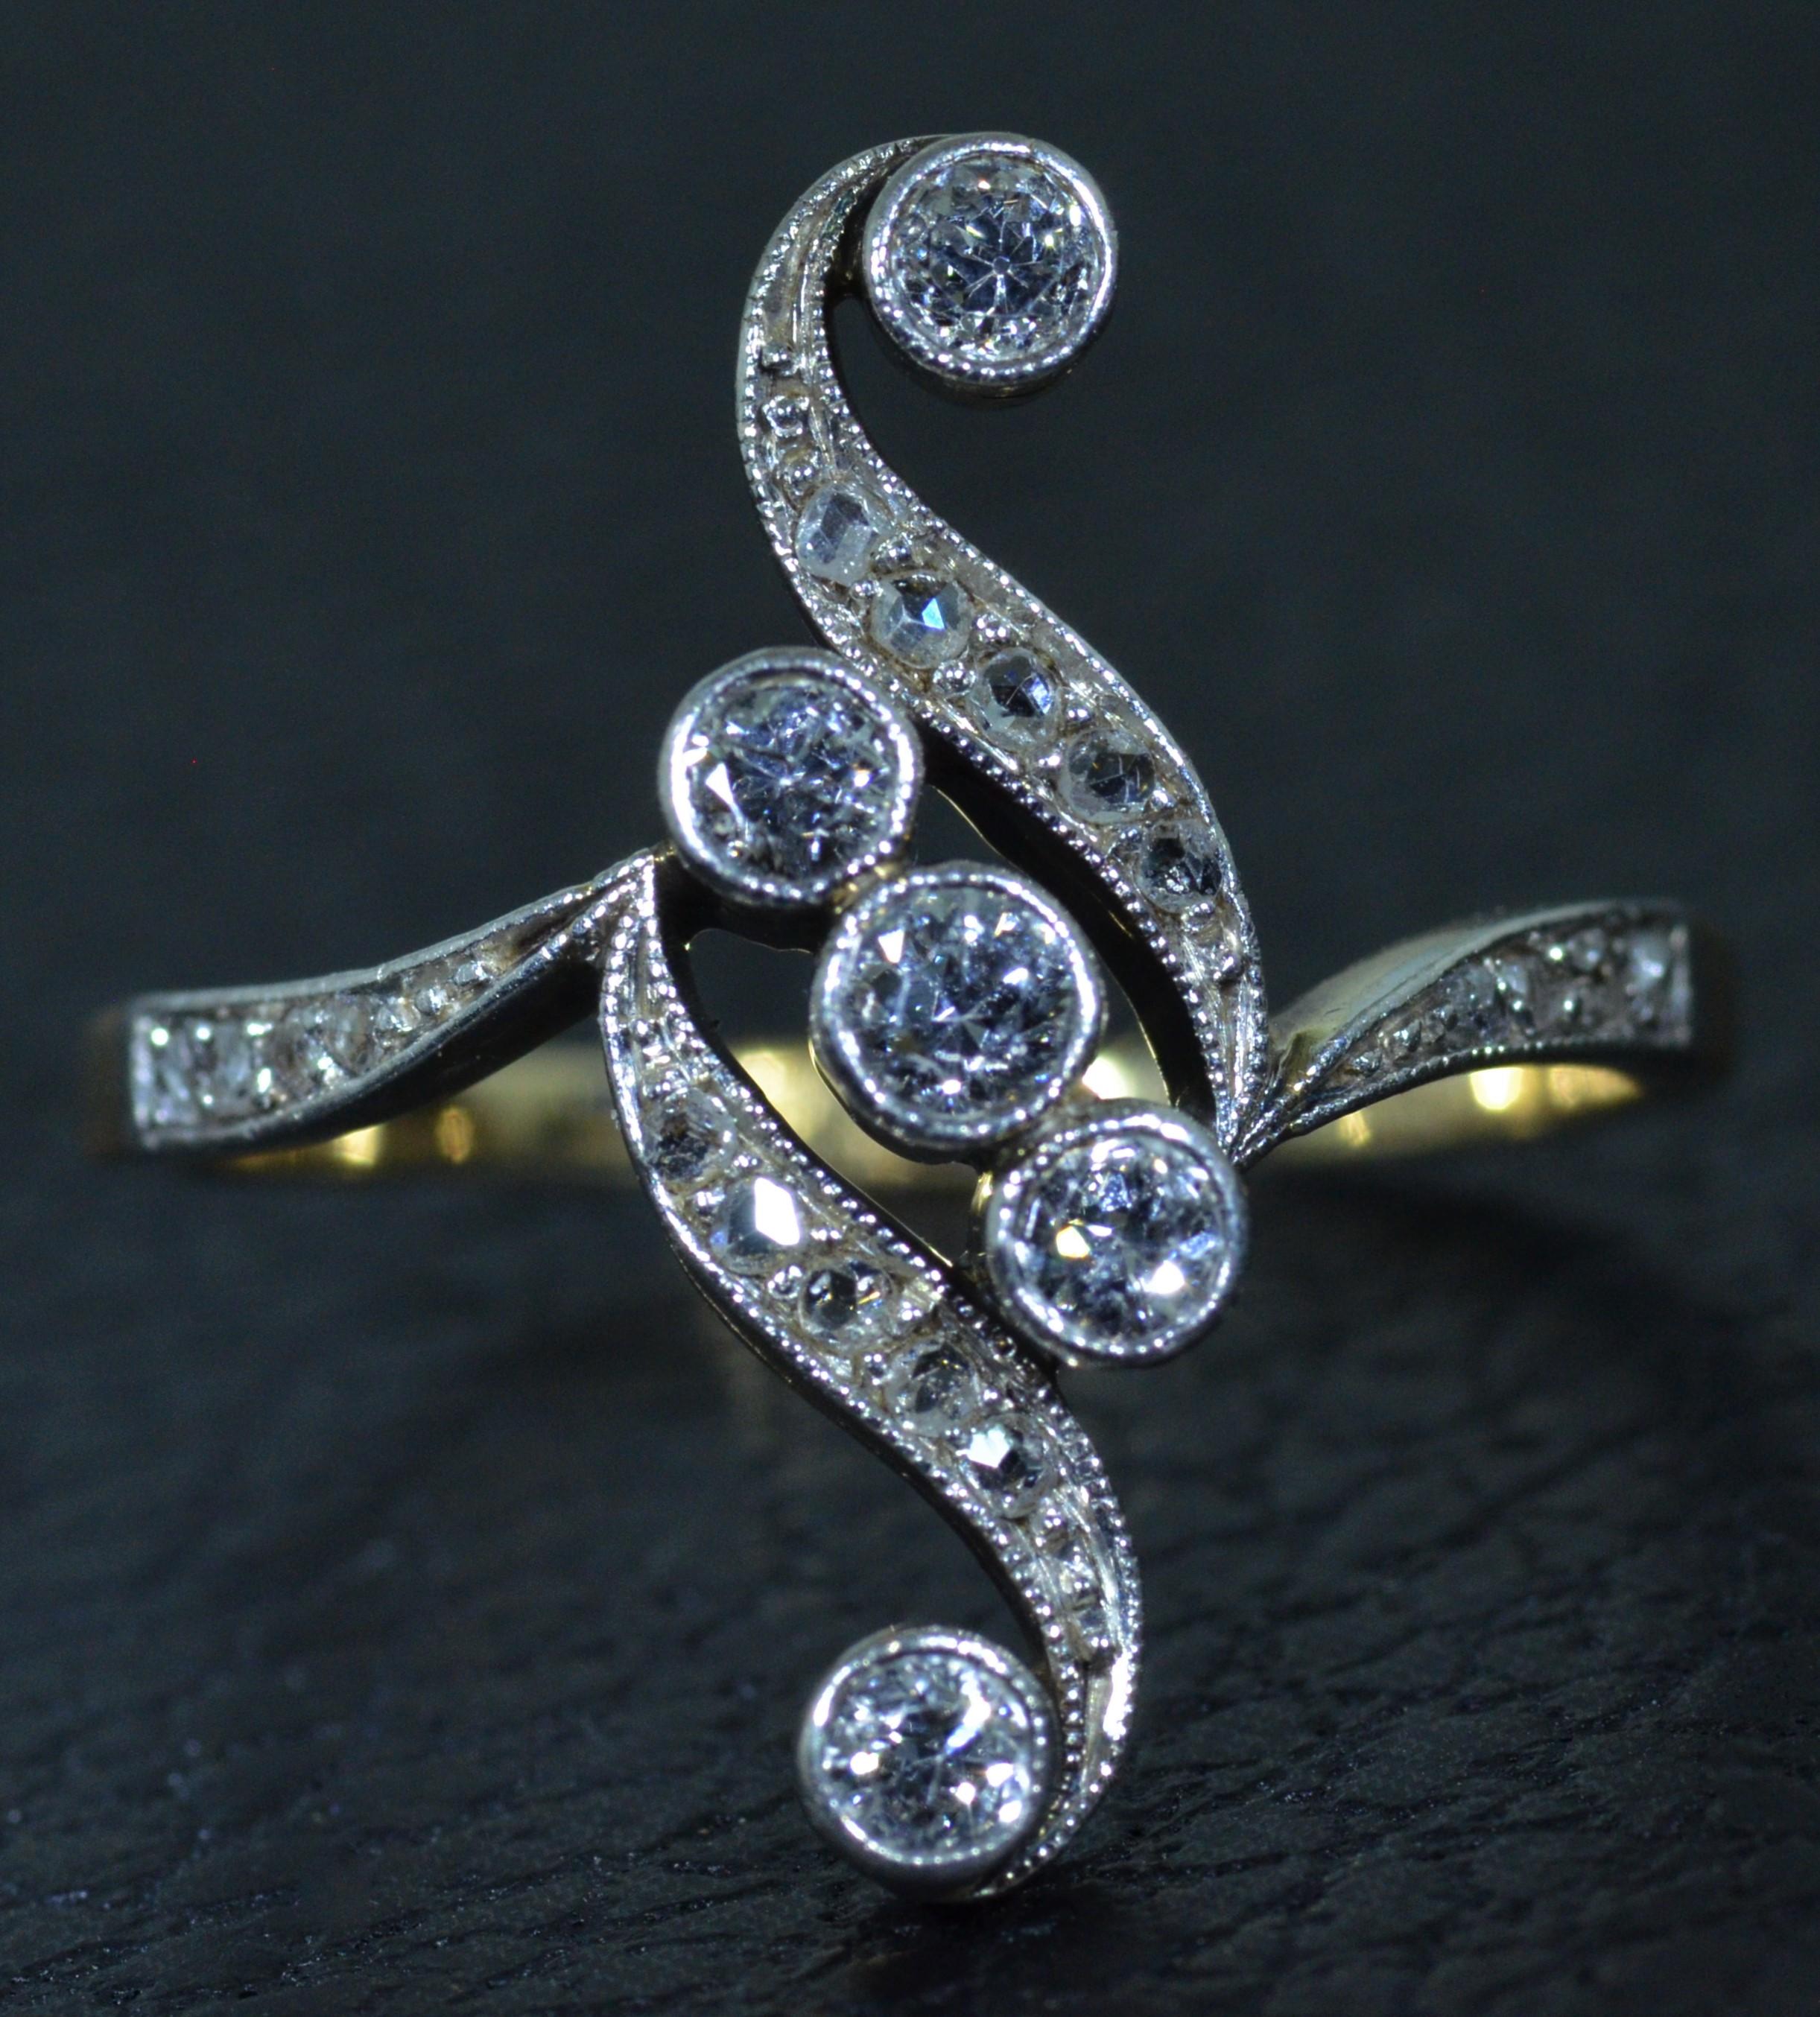 Ladies original antique ring from a European estate set with old mine cut diamonds and Rose cut diamonds throughout!